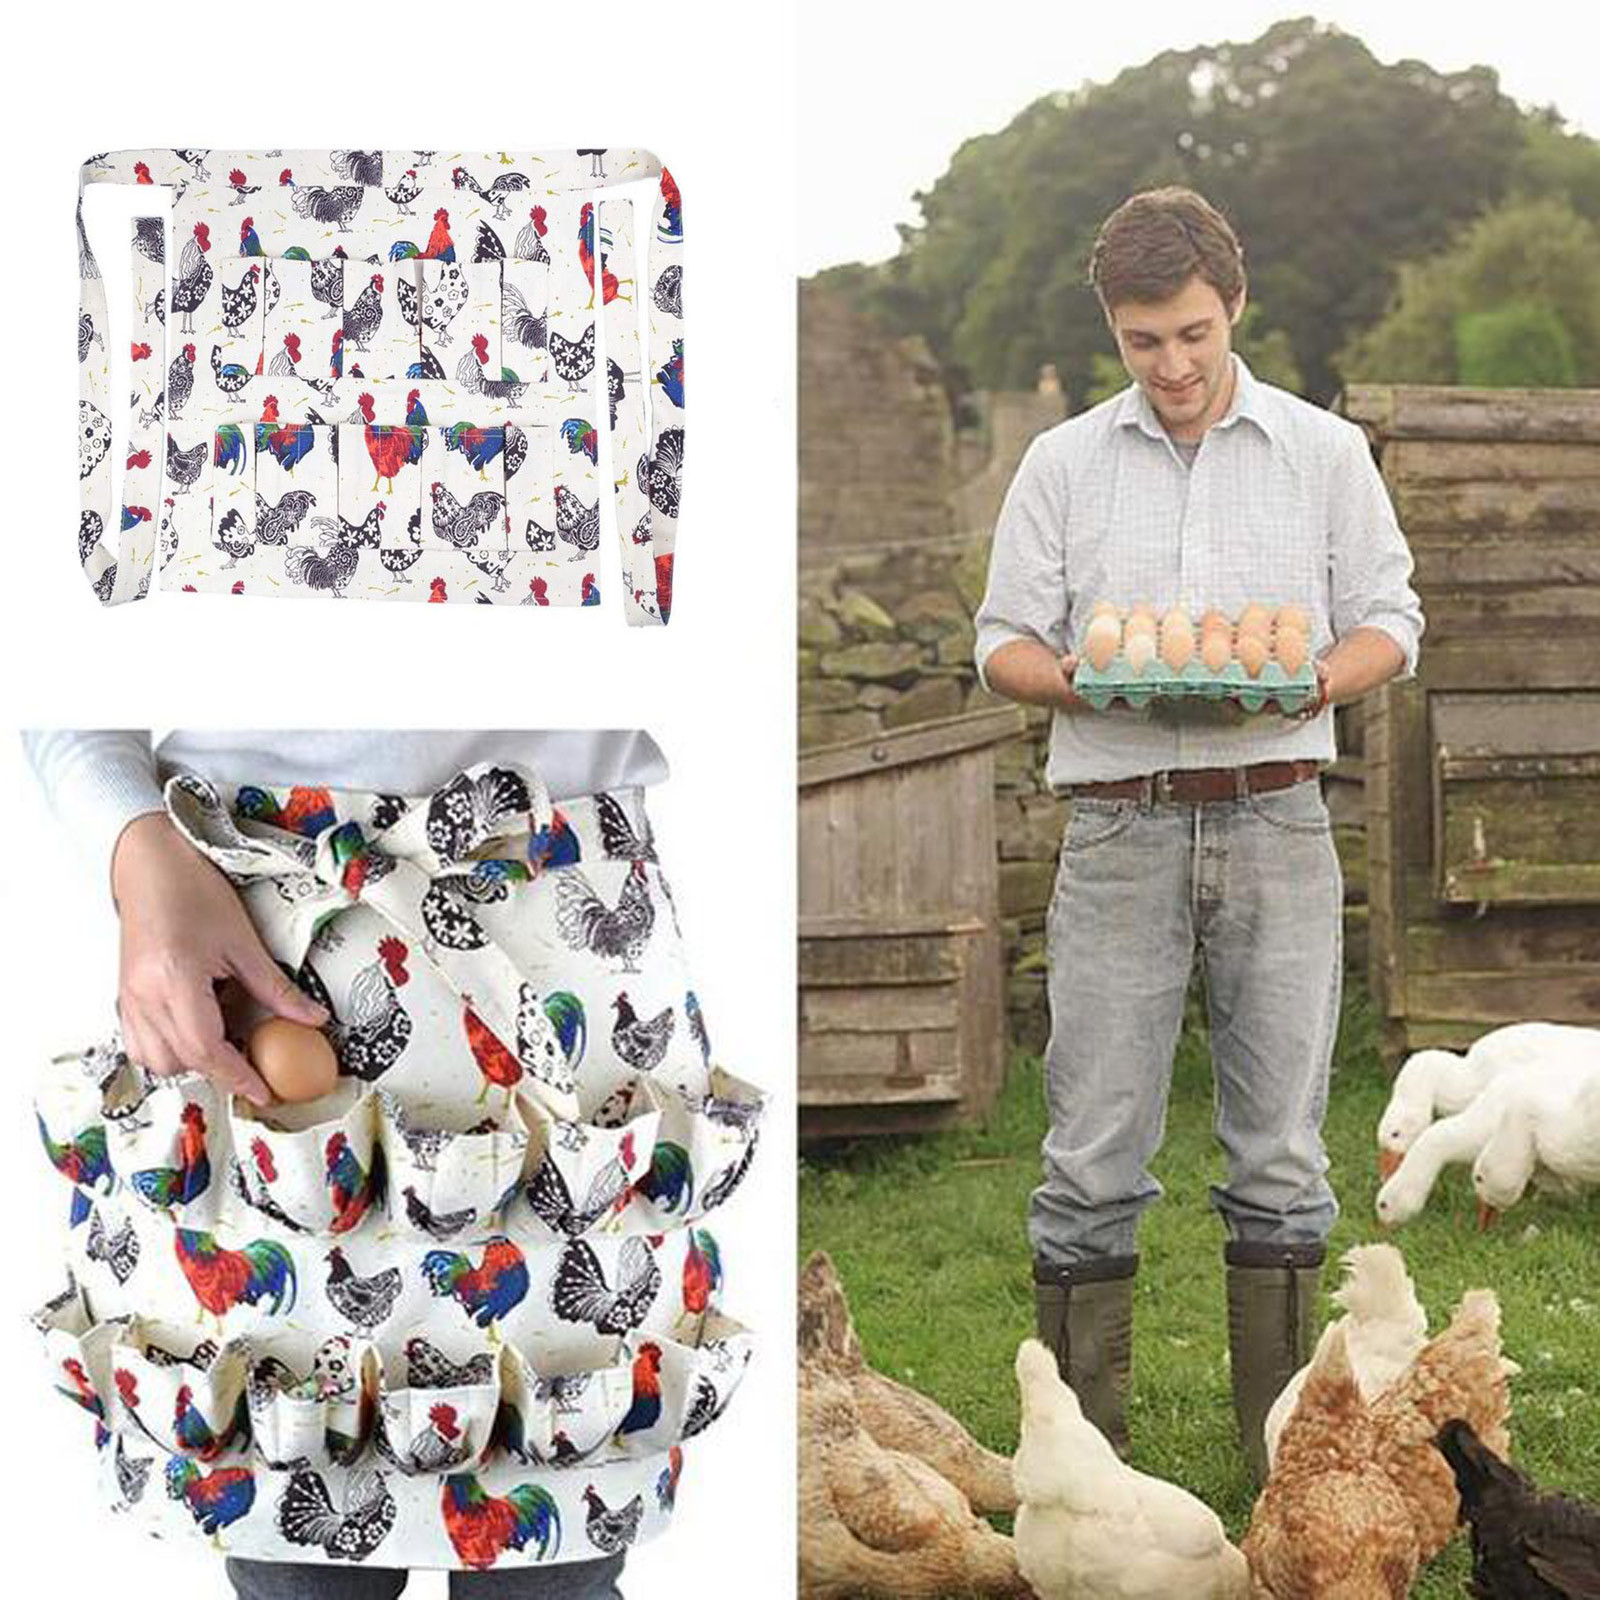 Egg Apron with 12 Pockets for Gathering Eggs - Bed Bath & Beyond - 25970203